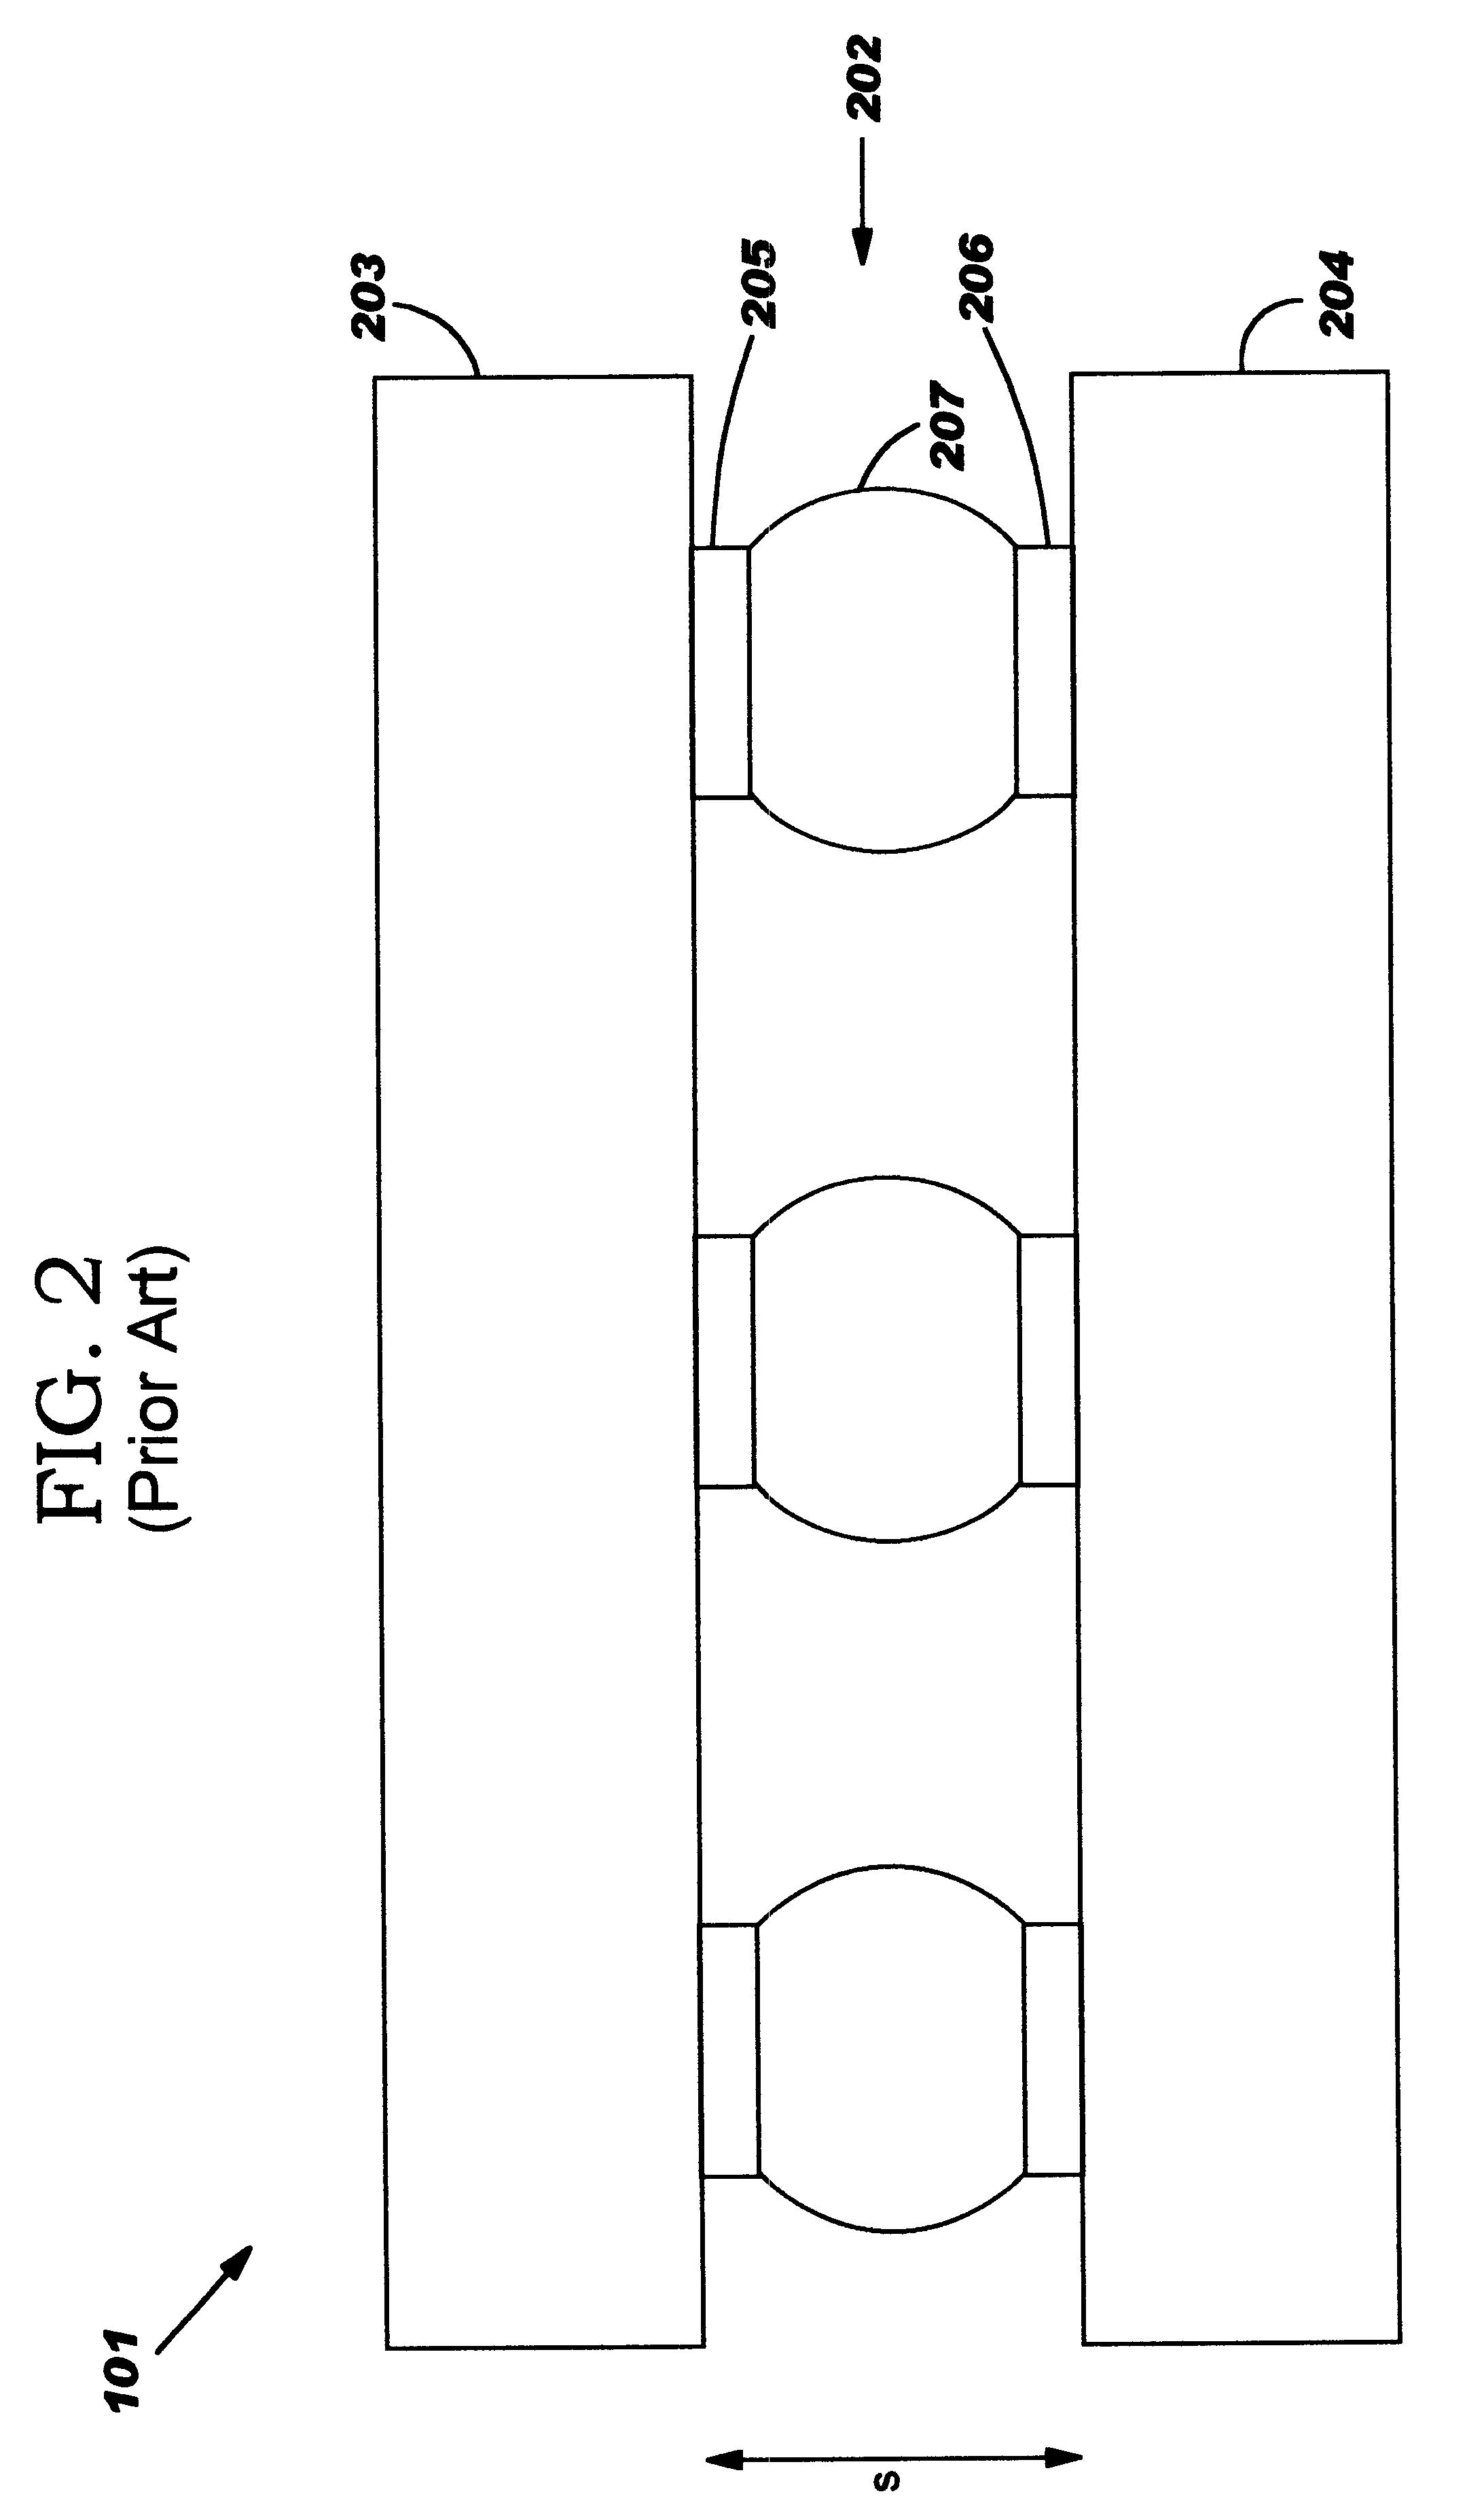 Method of reforming reformable members of an electronic package and the resultant electronic package